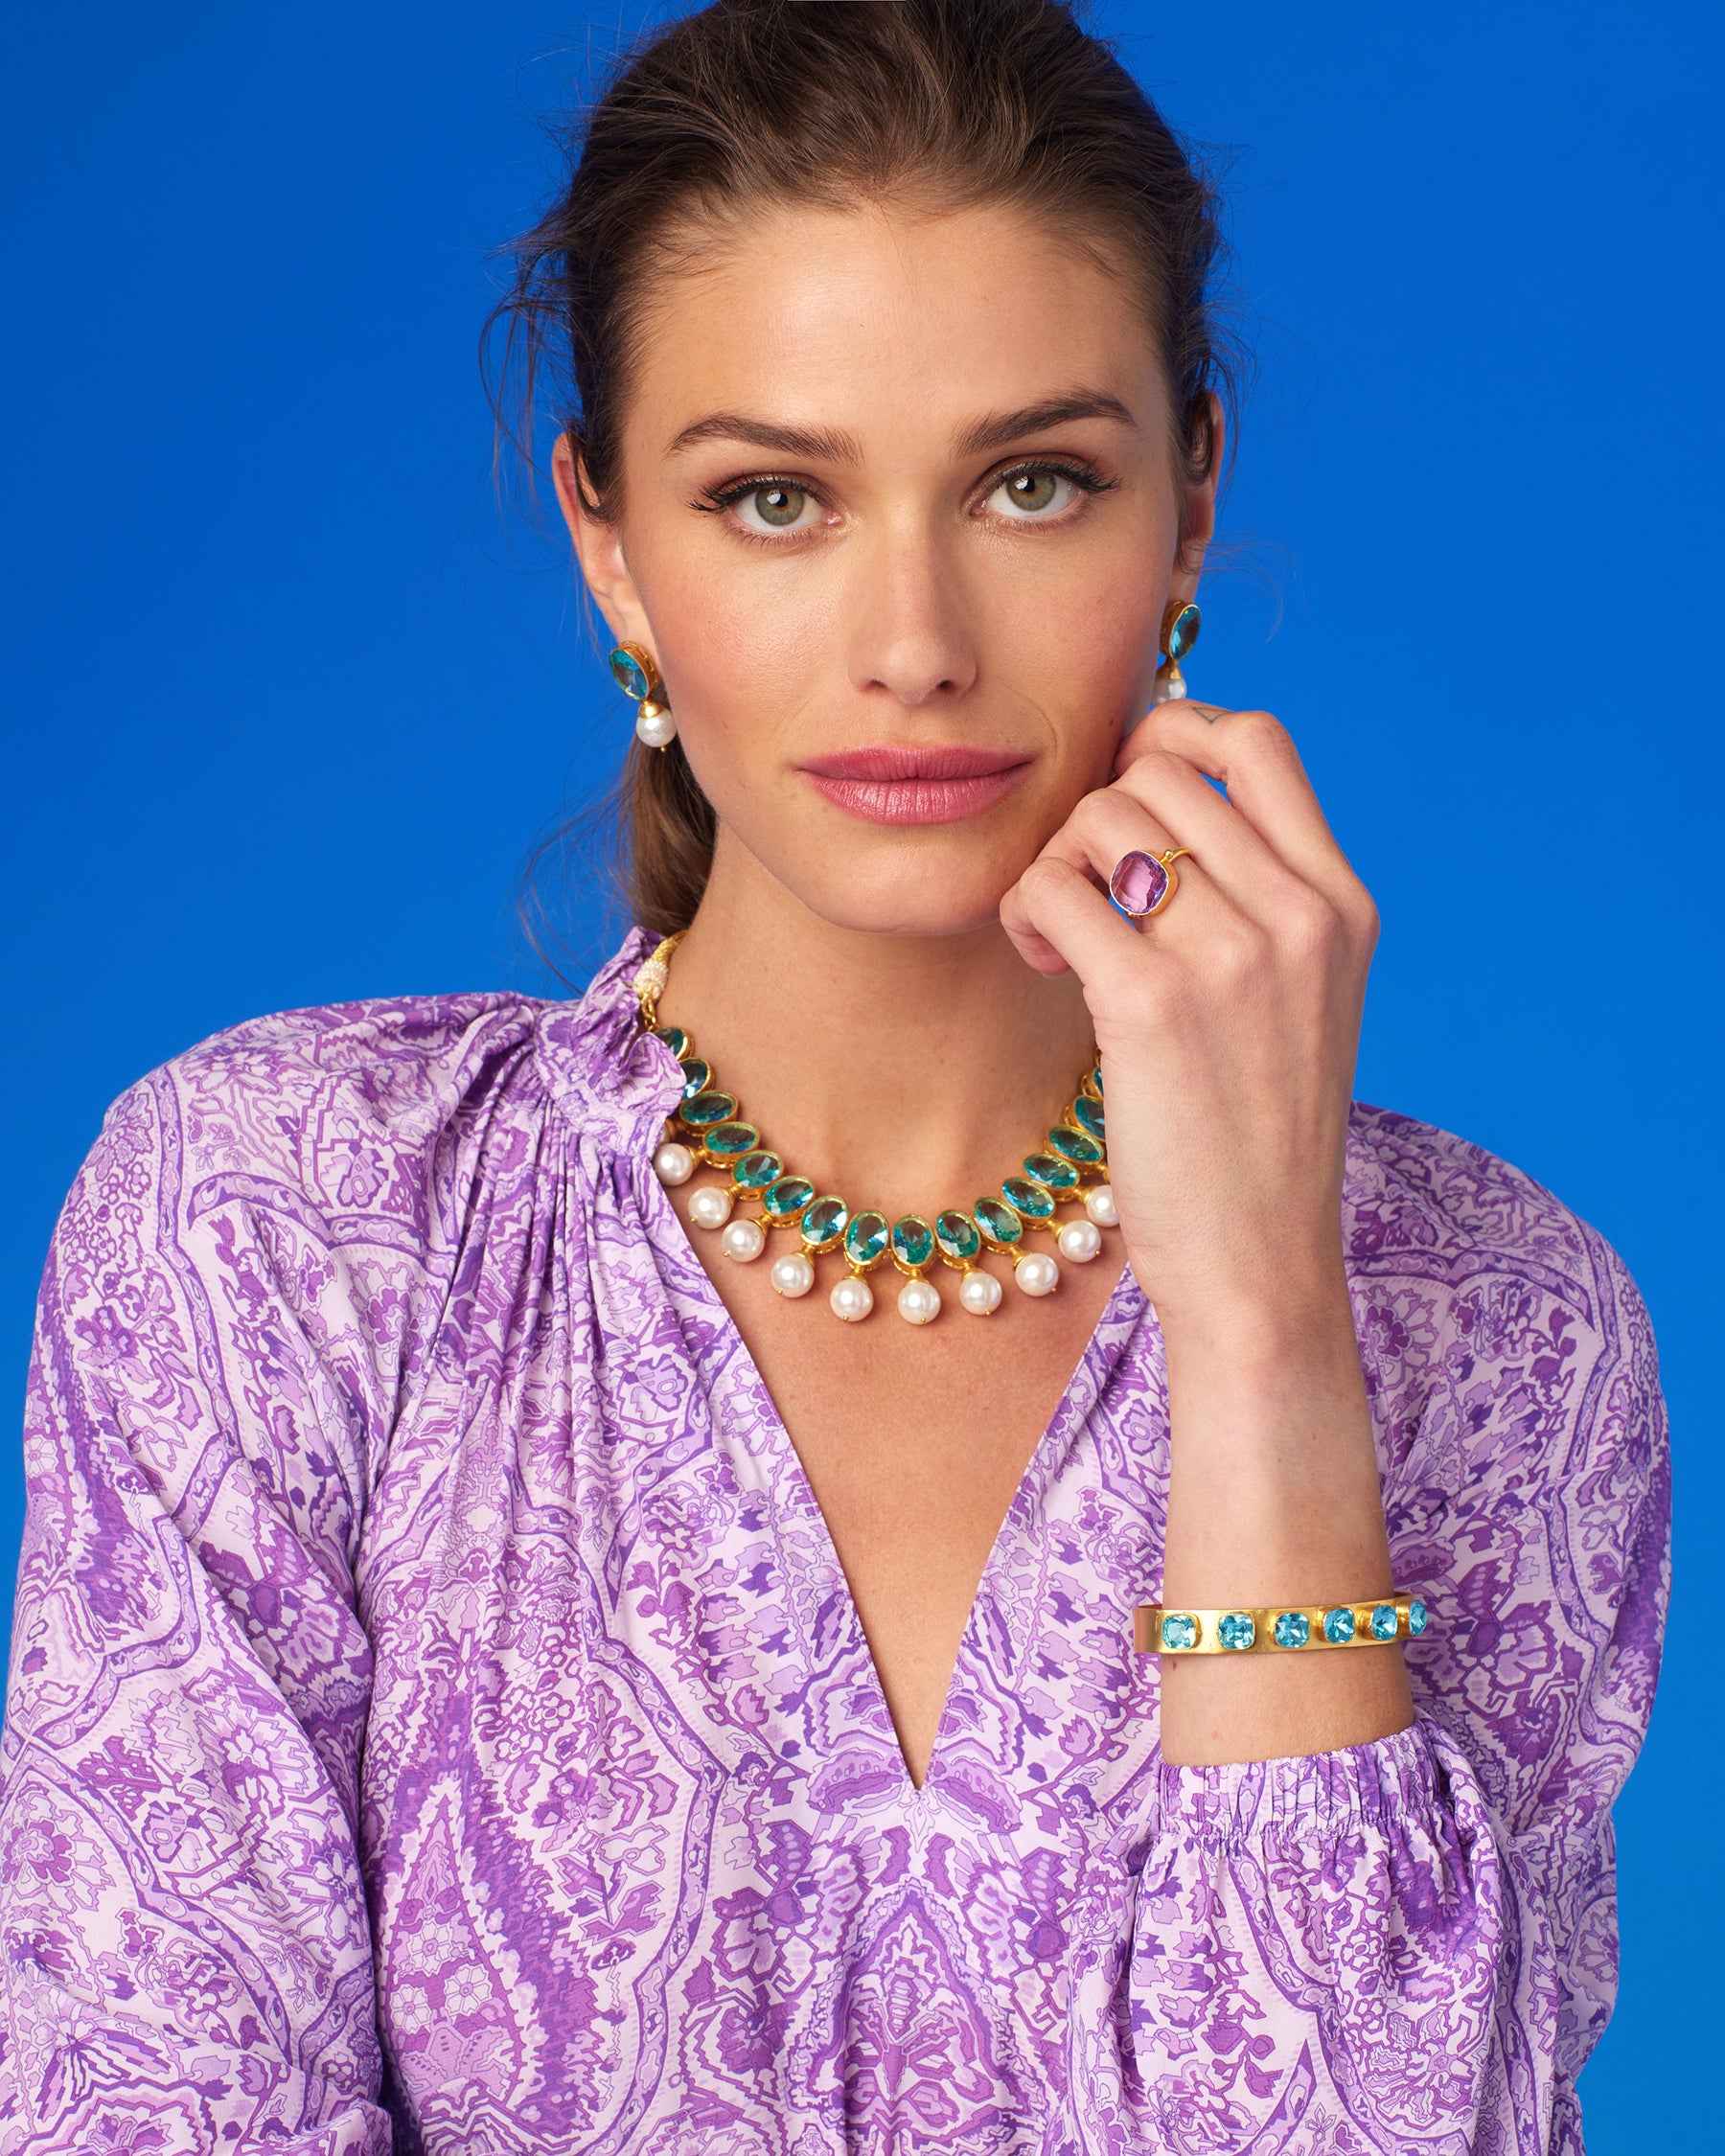 Finley Cuff Bracelet in Crystal Aquamarine-Worn with the Violette Ruffle Maxi Dress in Lavender Paisley